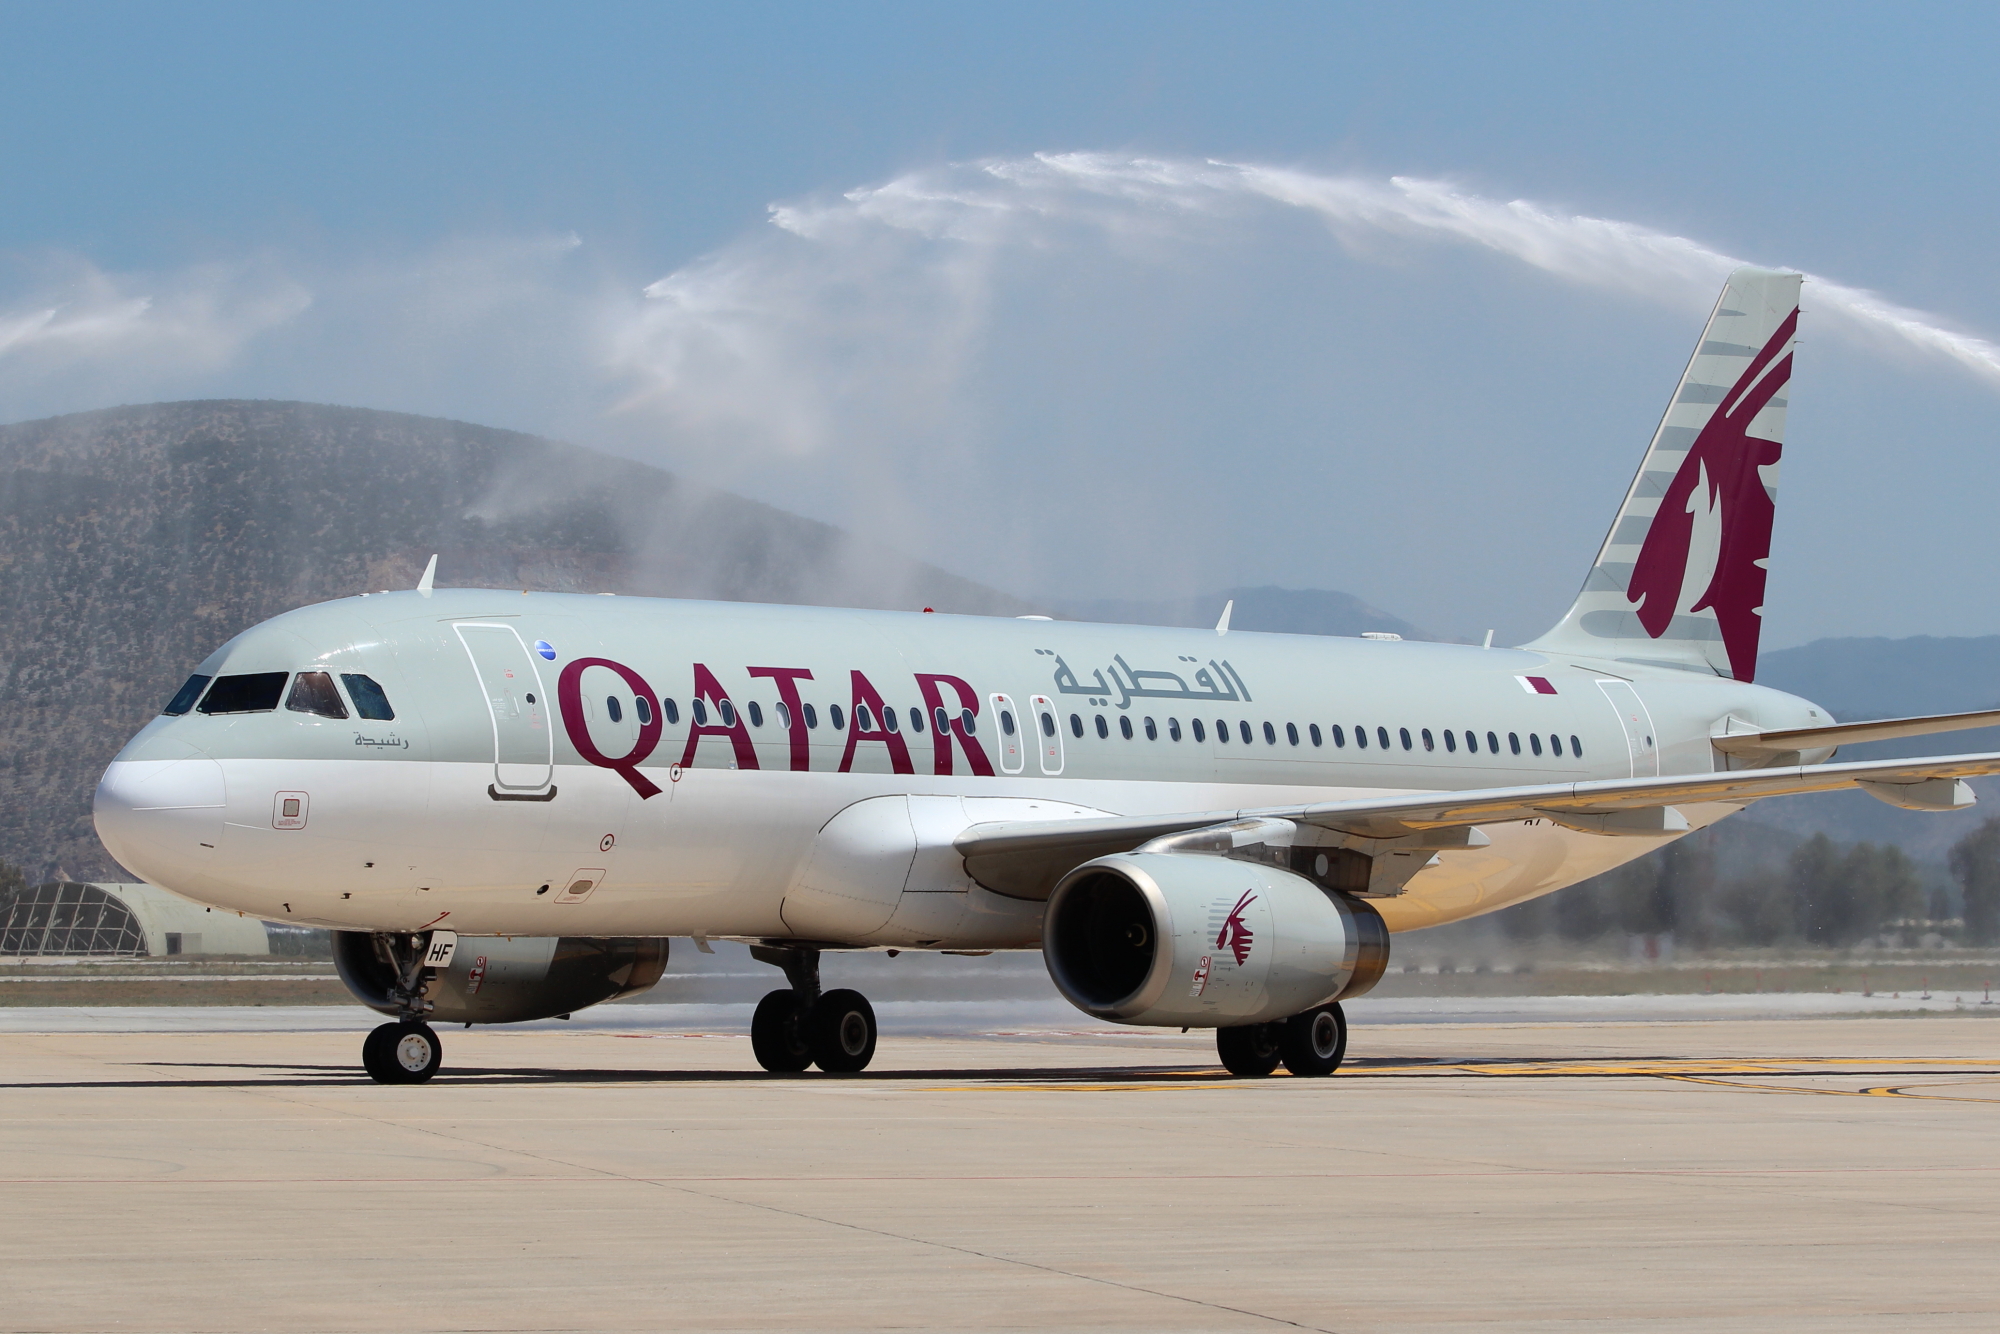 Qatar Airways Airbus A320. Click to enlarge.